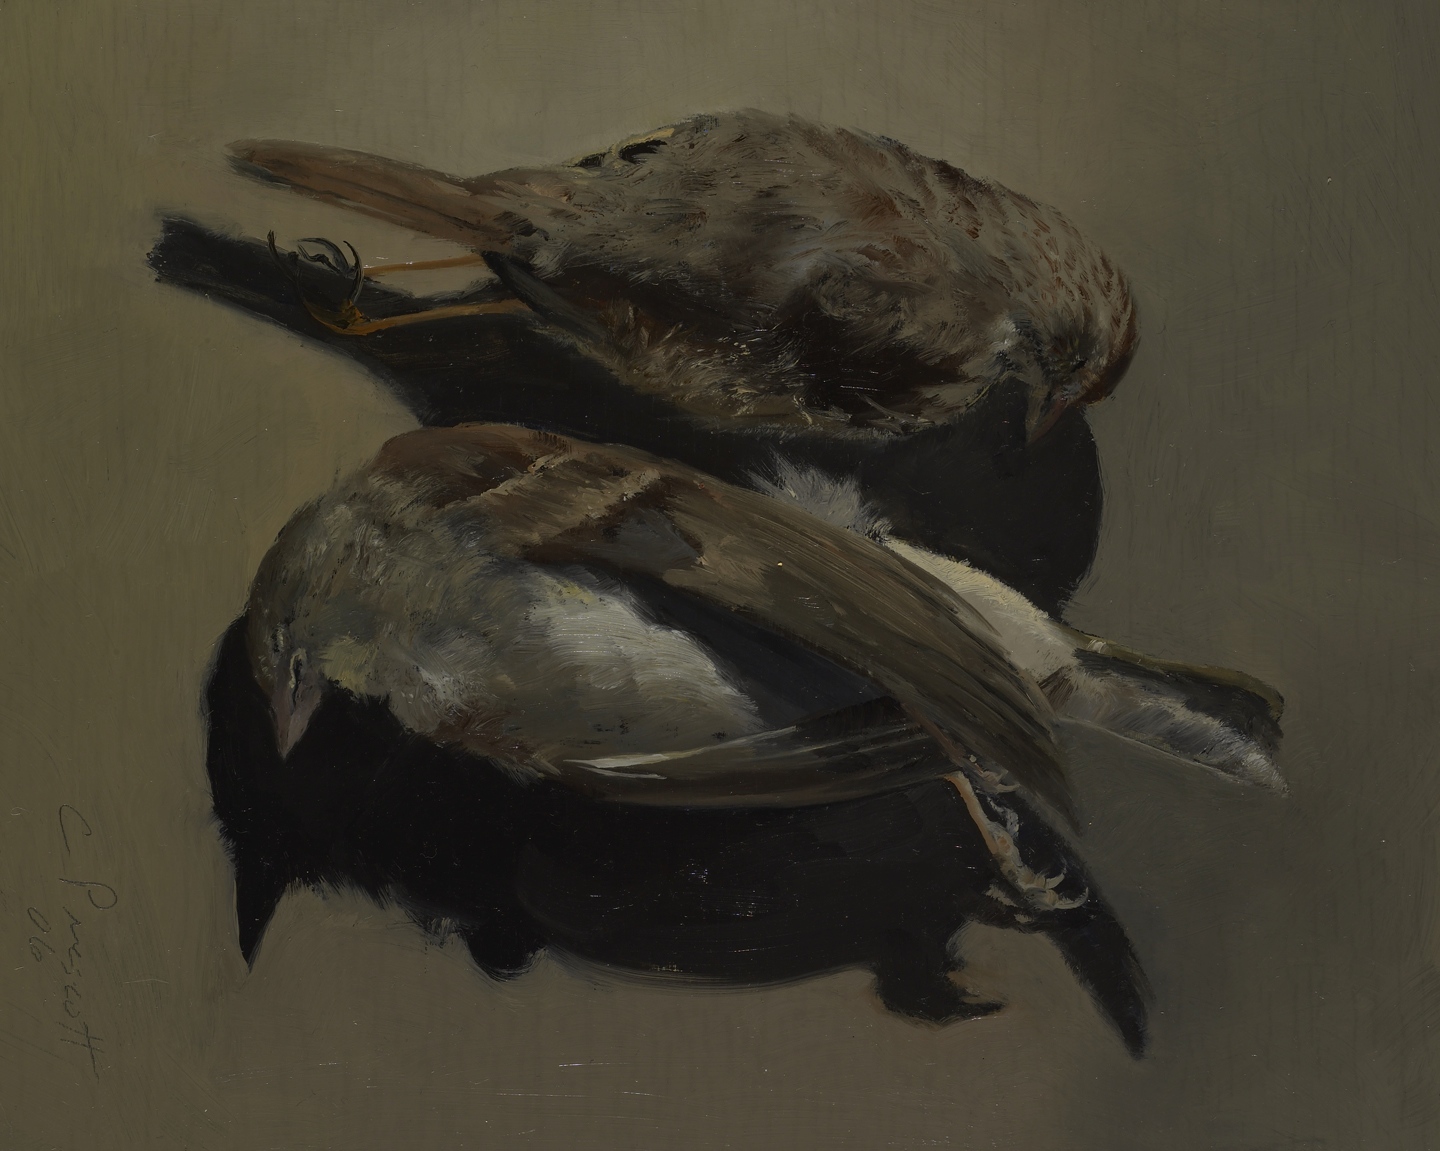   Two Brown Birds , Oil on Wood Panel, 2006, 10" x 8" 